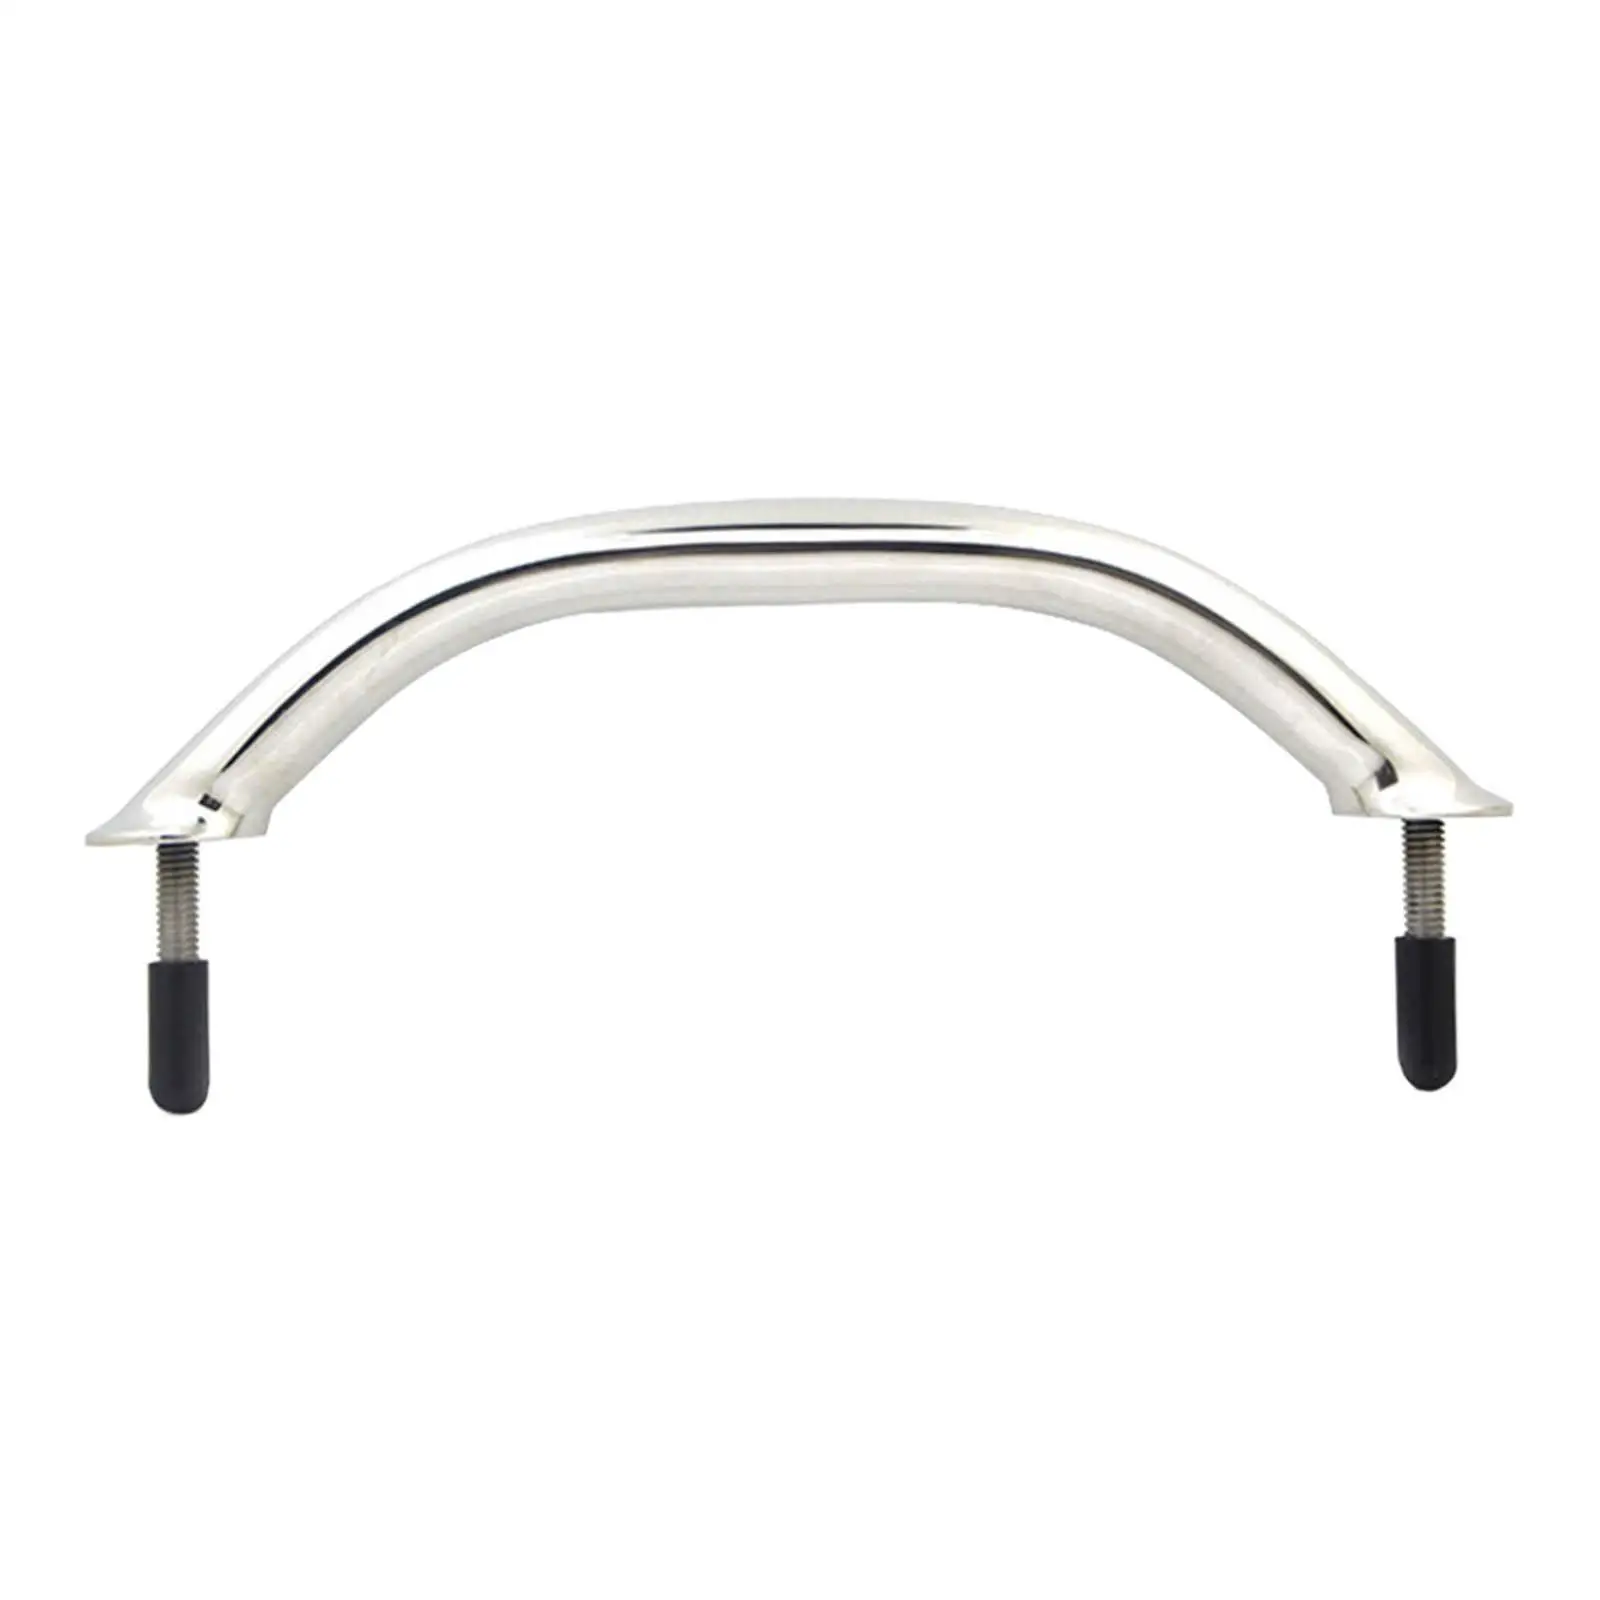 316 Stainless Steel Handrail Grab Handle 24inch Boat Accessories Balance Assist Wall Mounted Towels Rail for Ship Marine RV